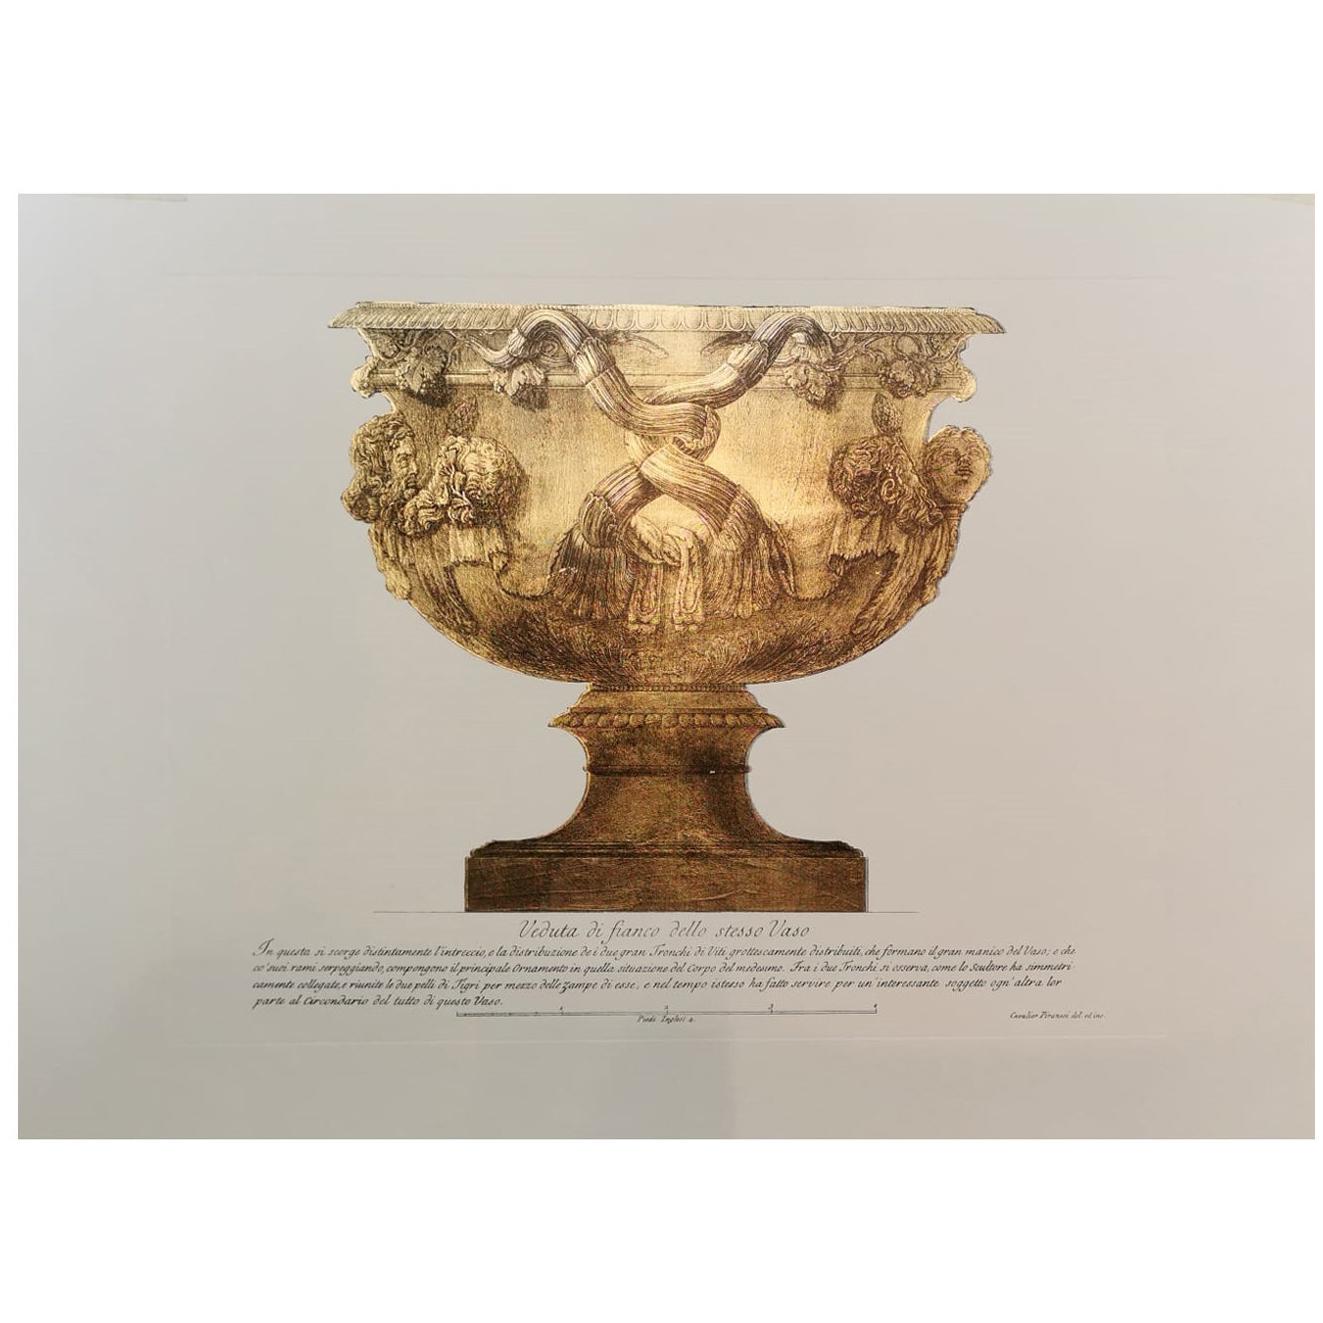 Italian Handmade Antique Vase Print with Press Engraving on Pure Gold Leaf